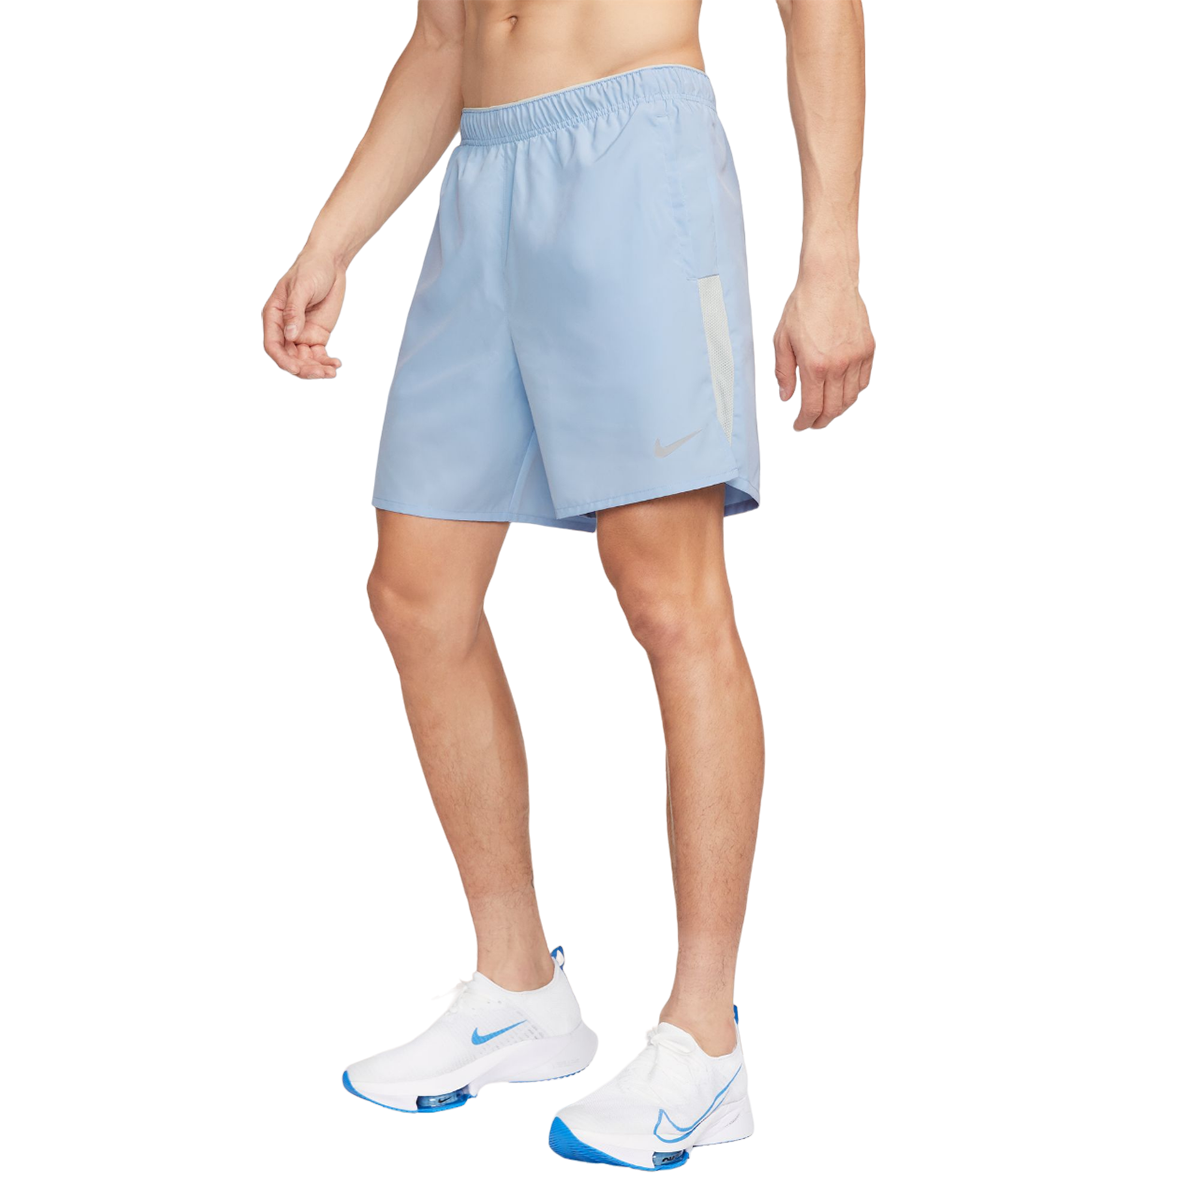 Nike Dri-FIT Challenger Short, , large image number null